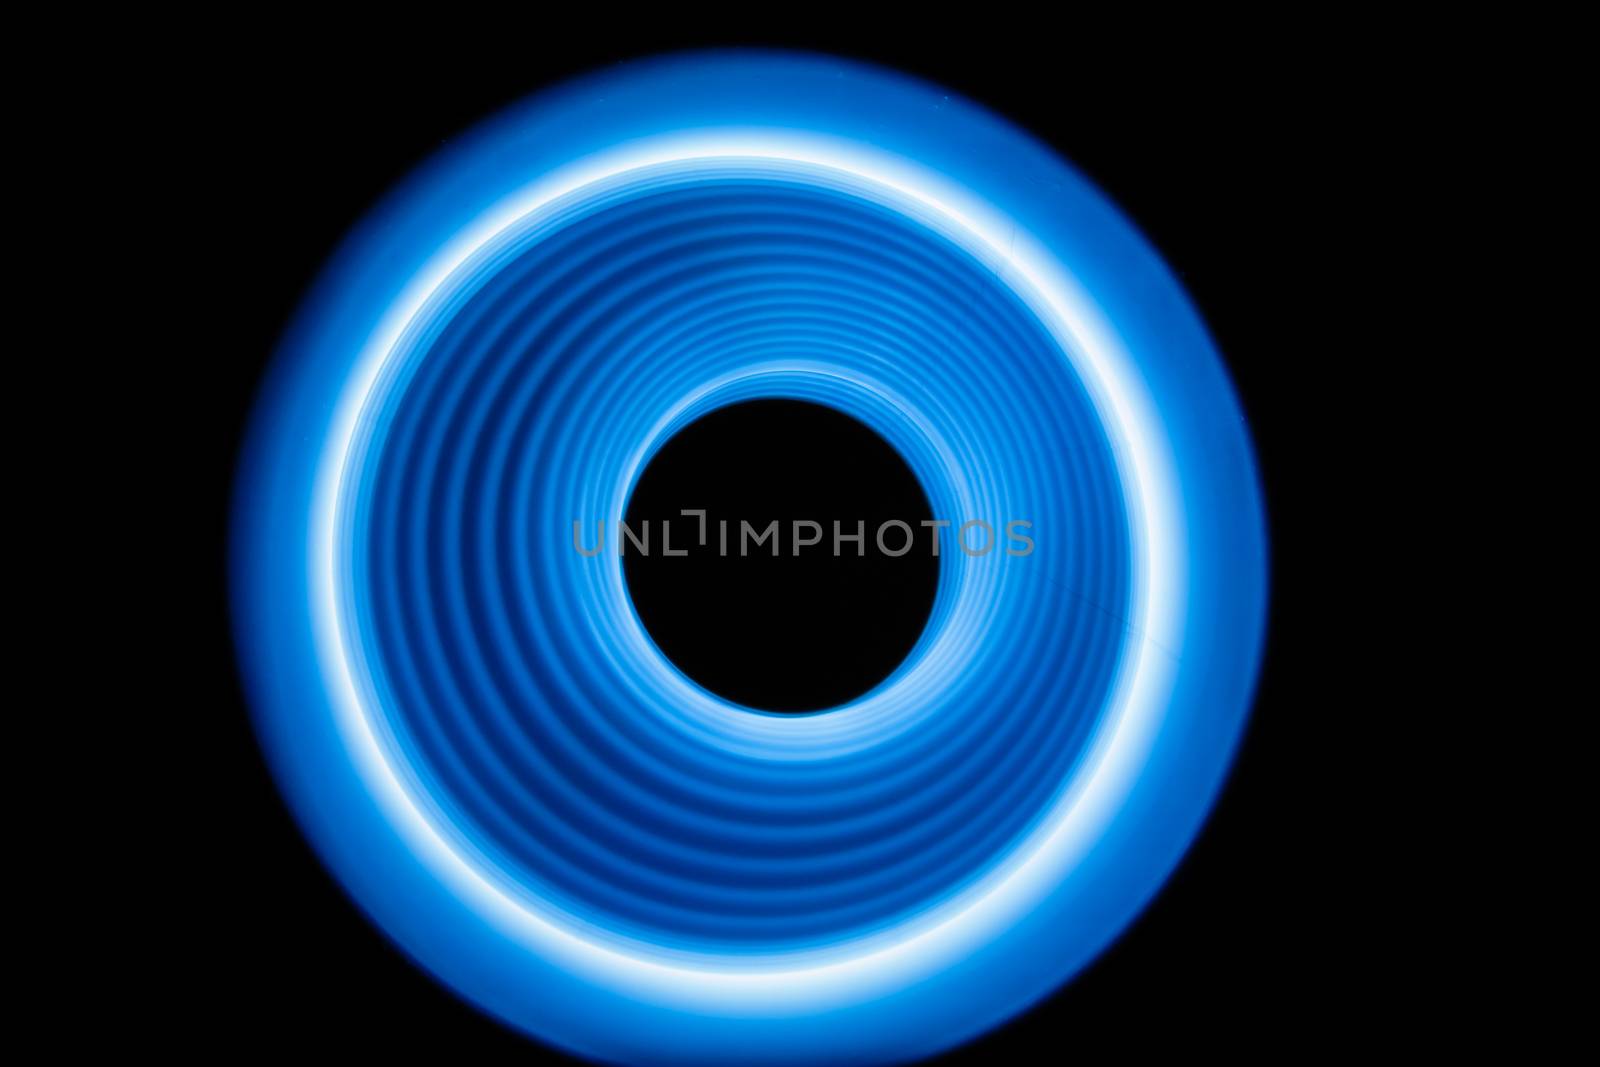 Blurred sound waves in the visible blue color in the dark